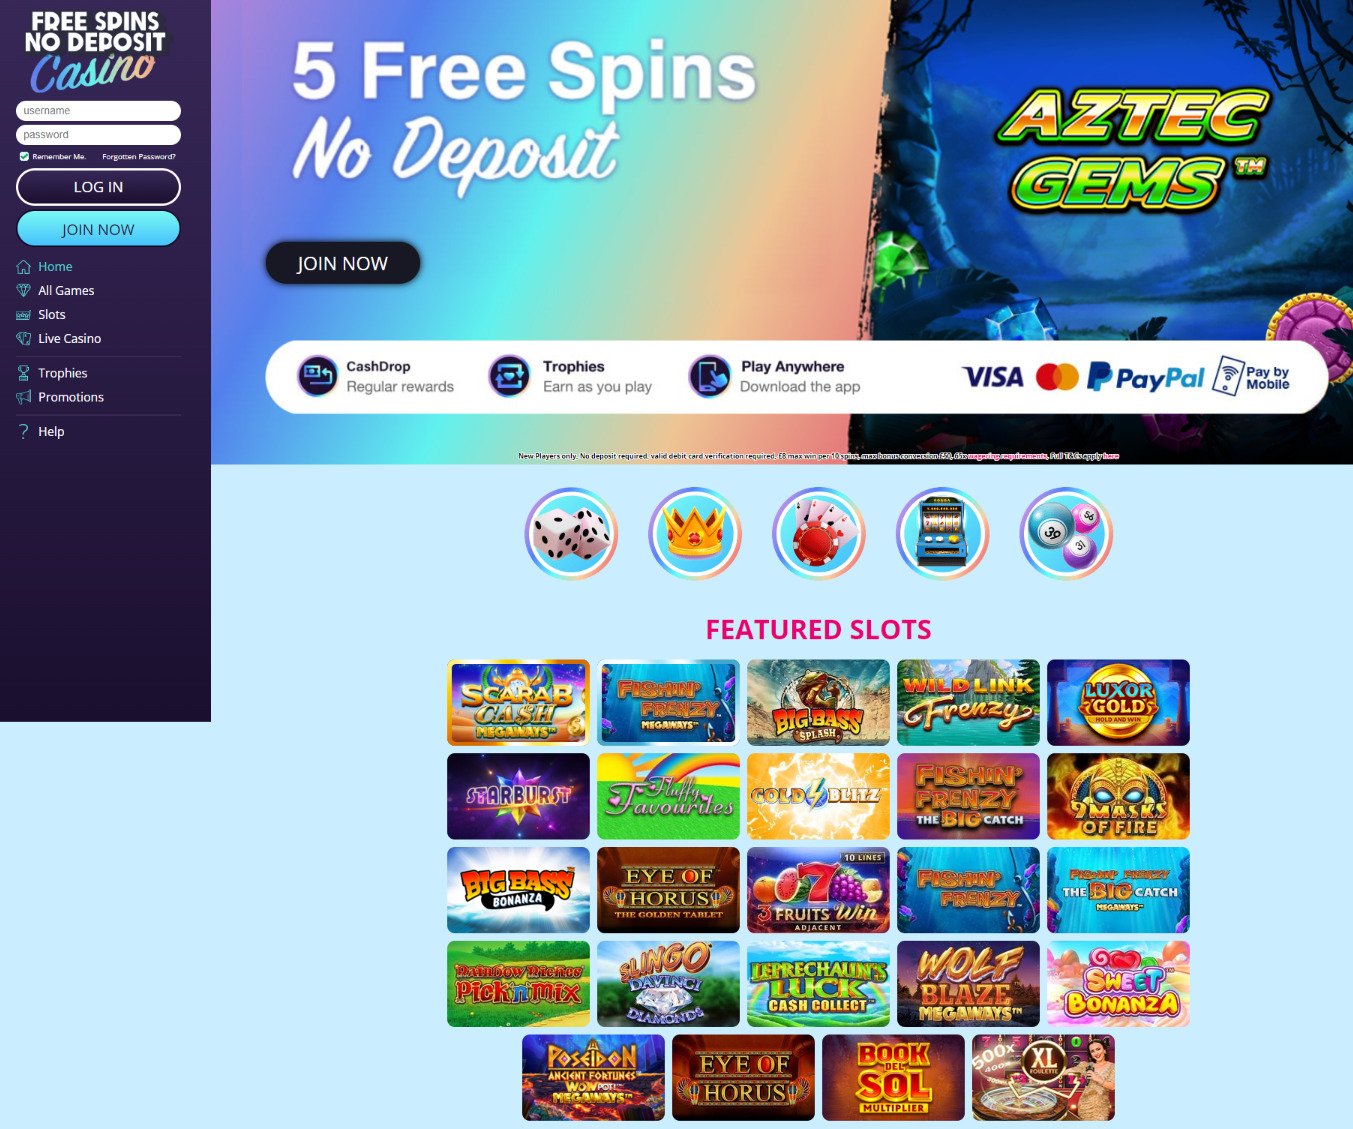 Free Spins No Deposit Casino review